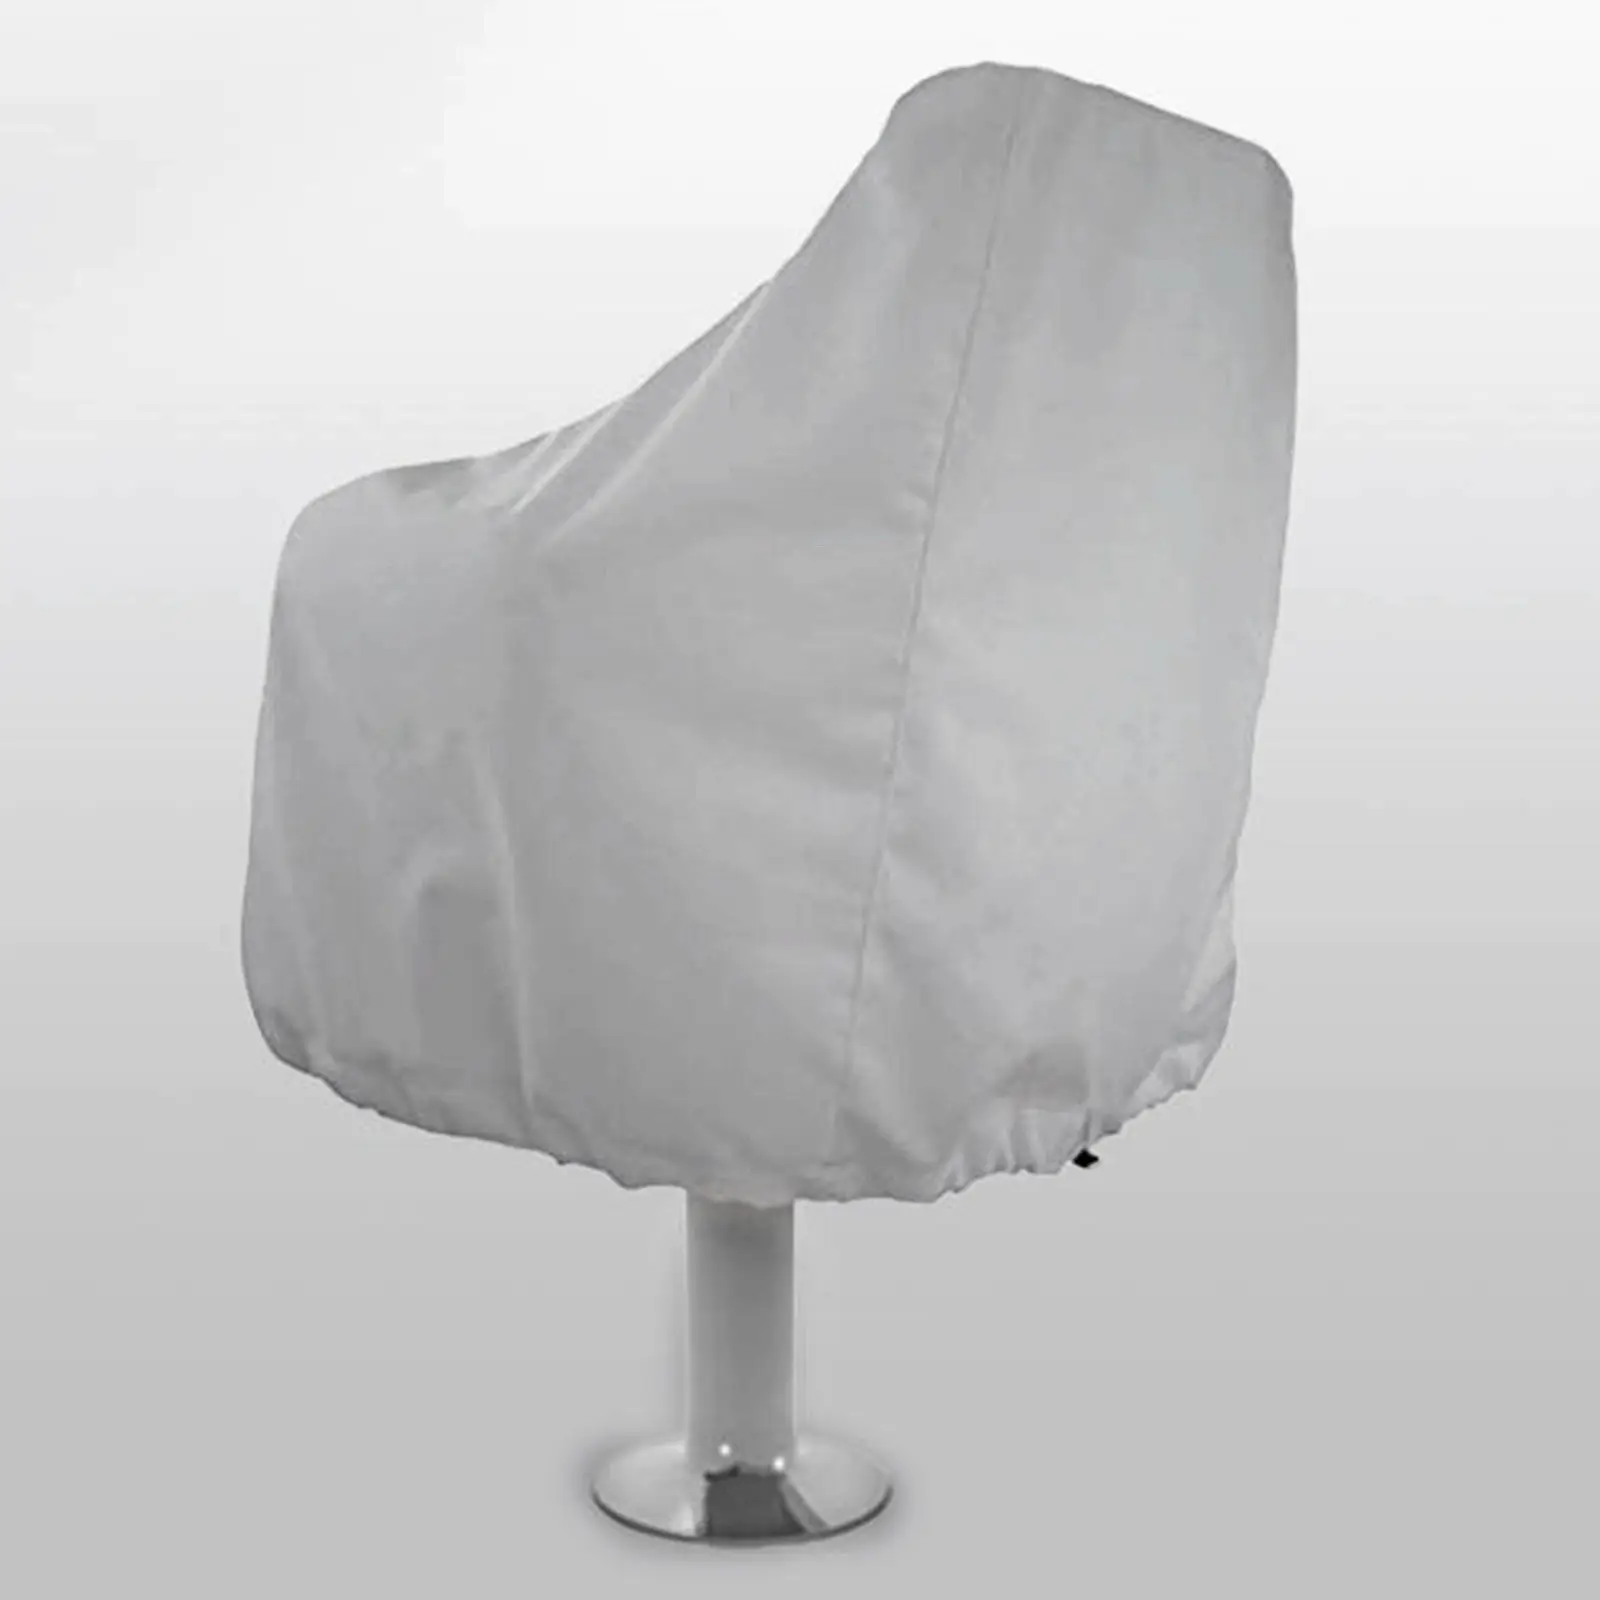 Boat Seat Cover Outdoor Protection 210D Oxford Cloth Dust Yacht Waterproof UV Resistant Chair Furniture Cover